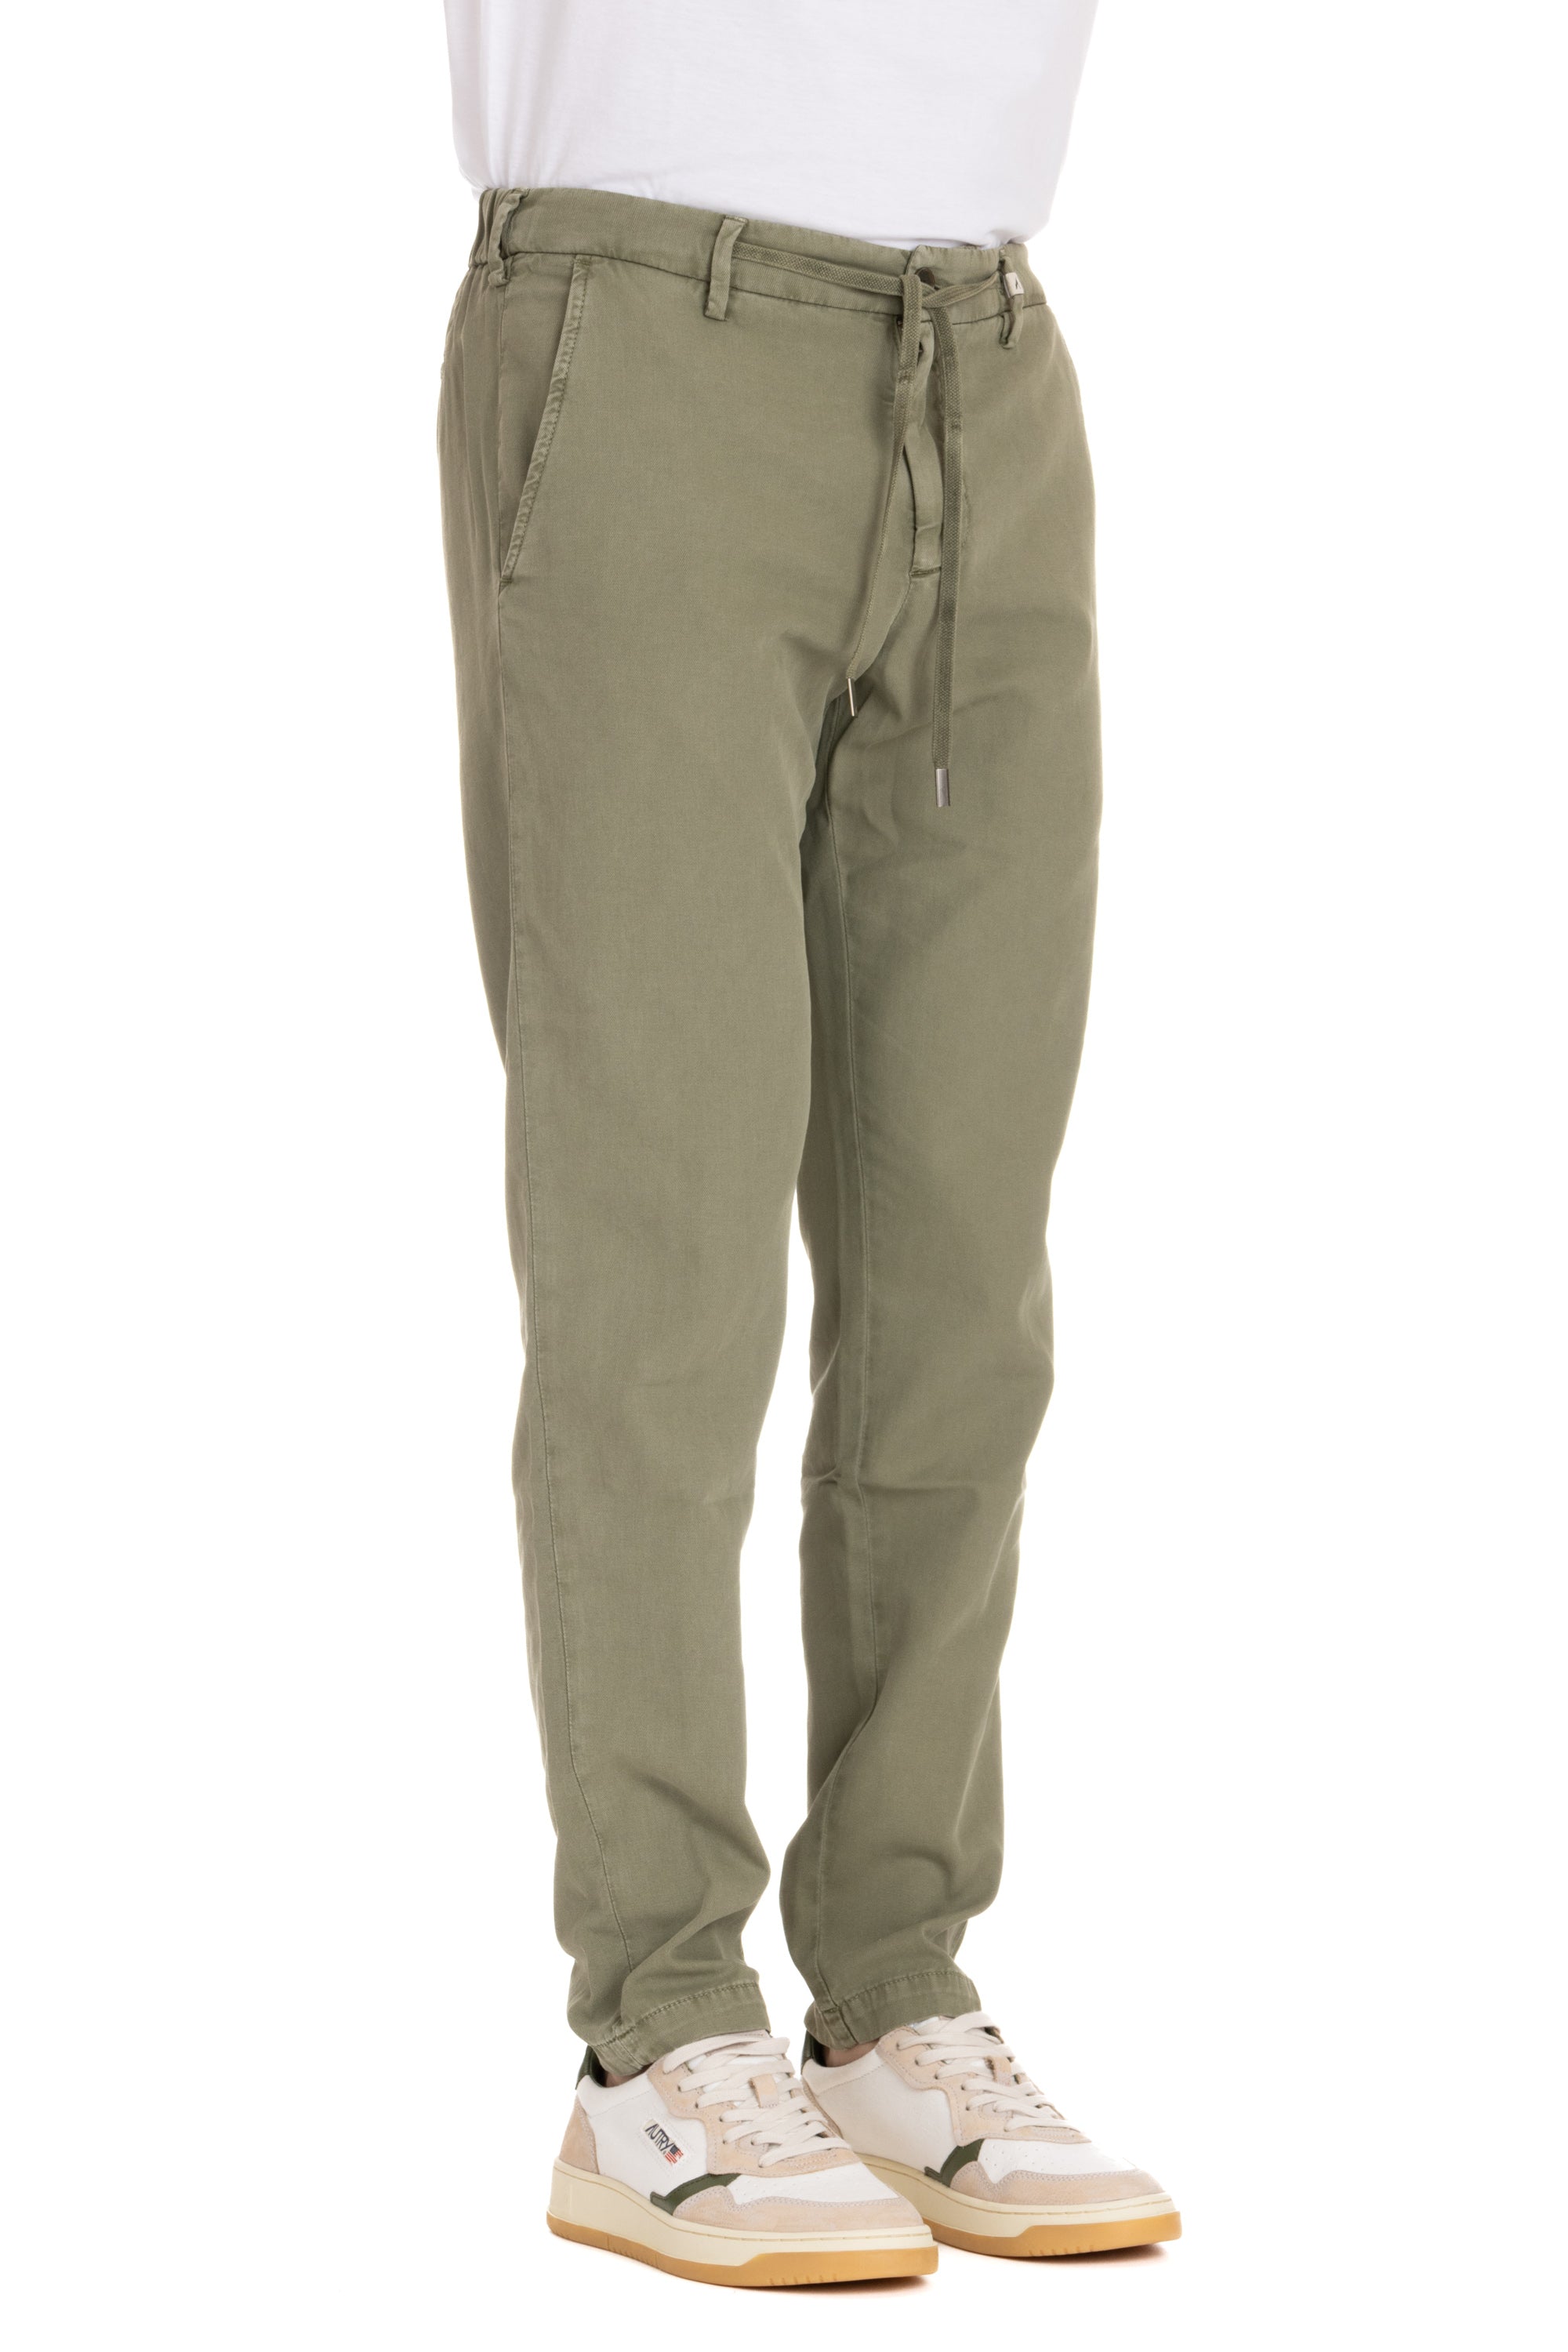 Pantalone in cotone ice cotton con coulisse